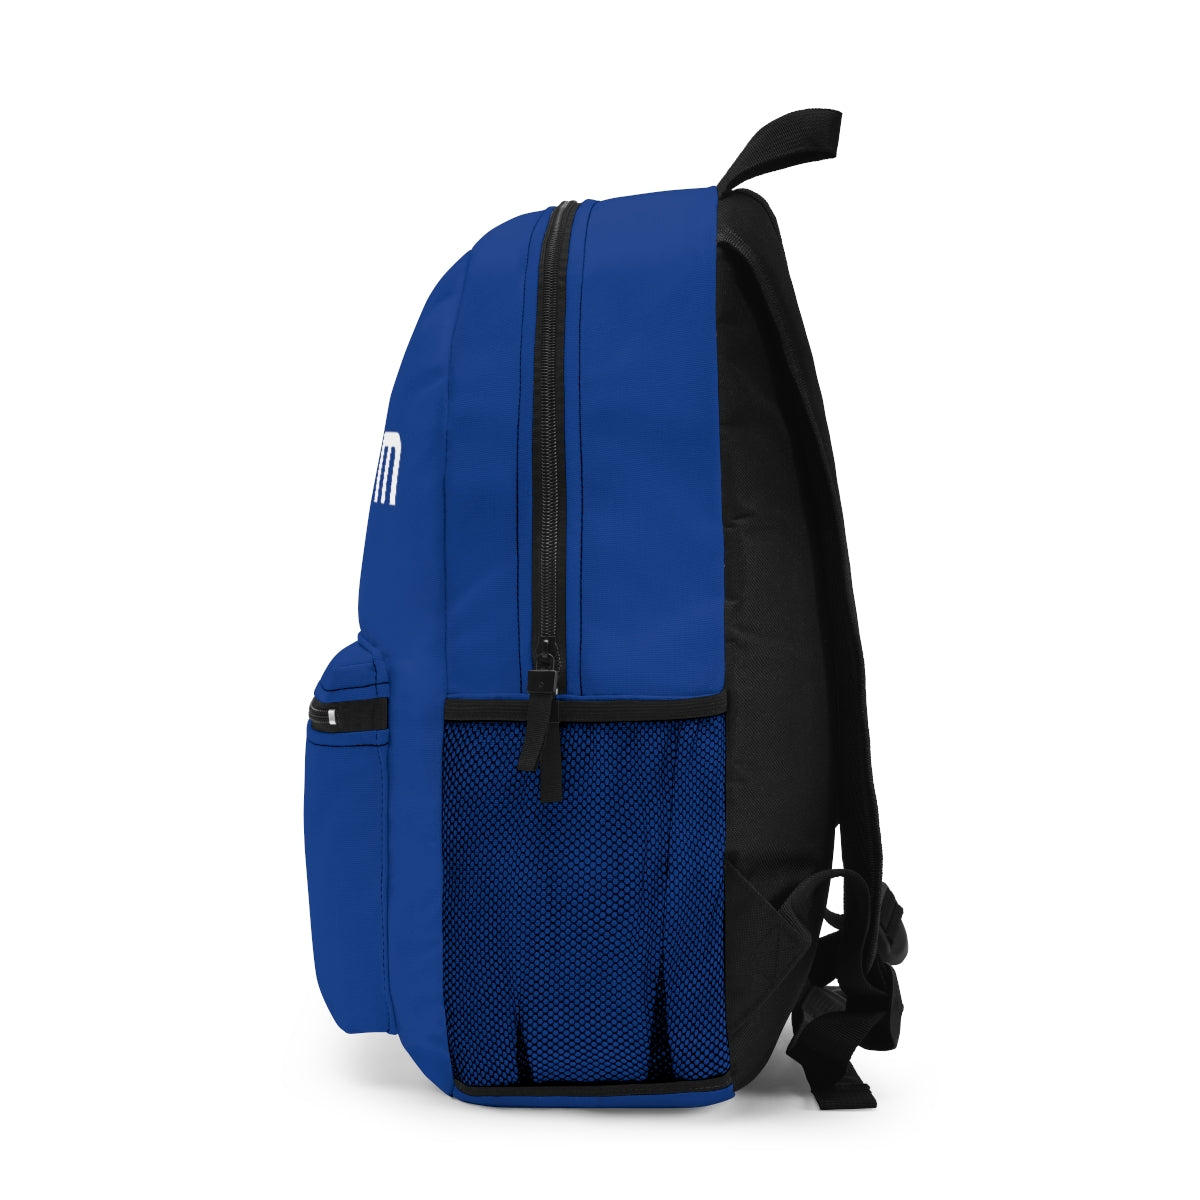 FITTEAM Backpack